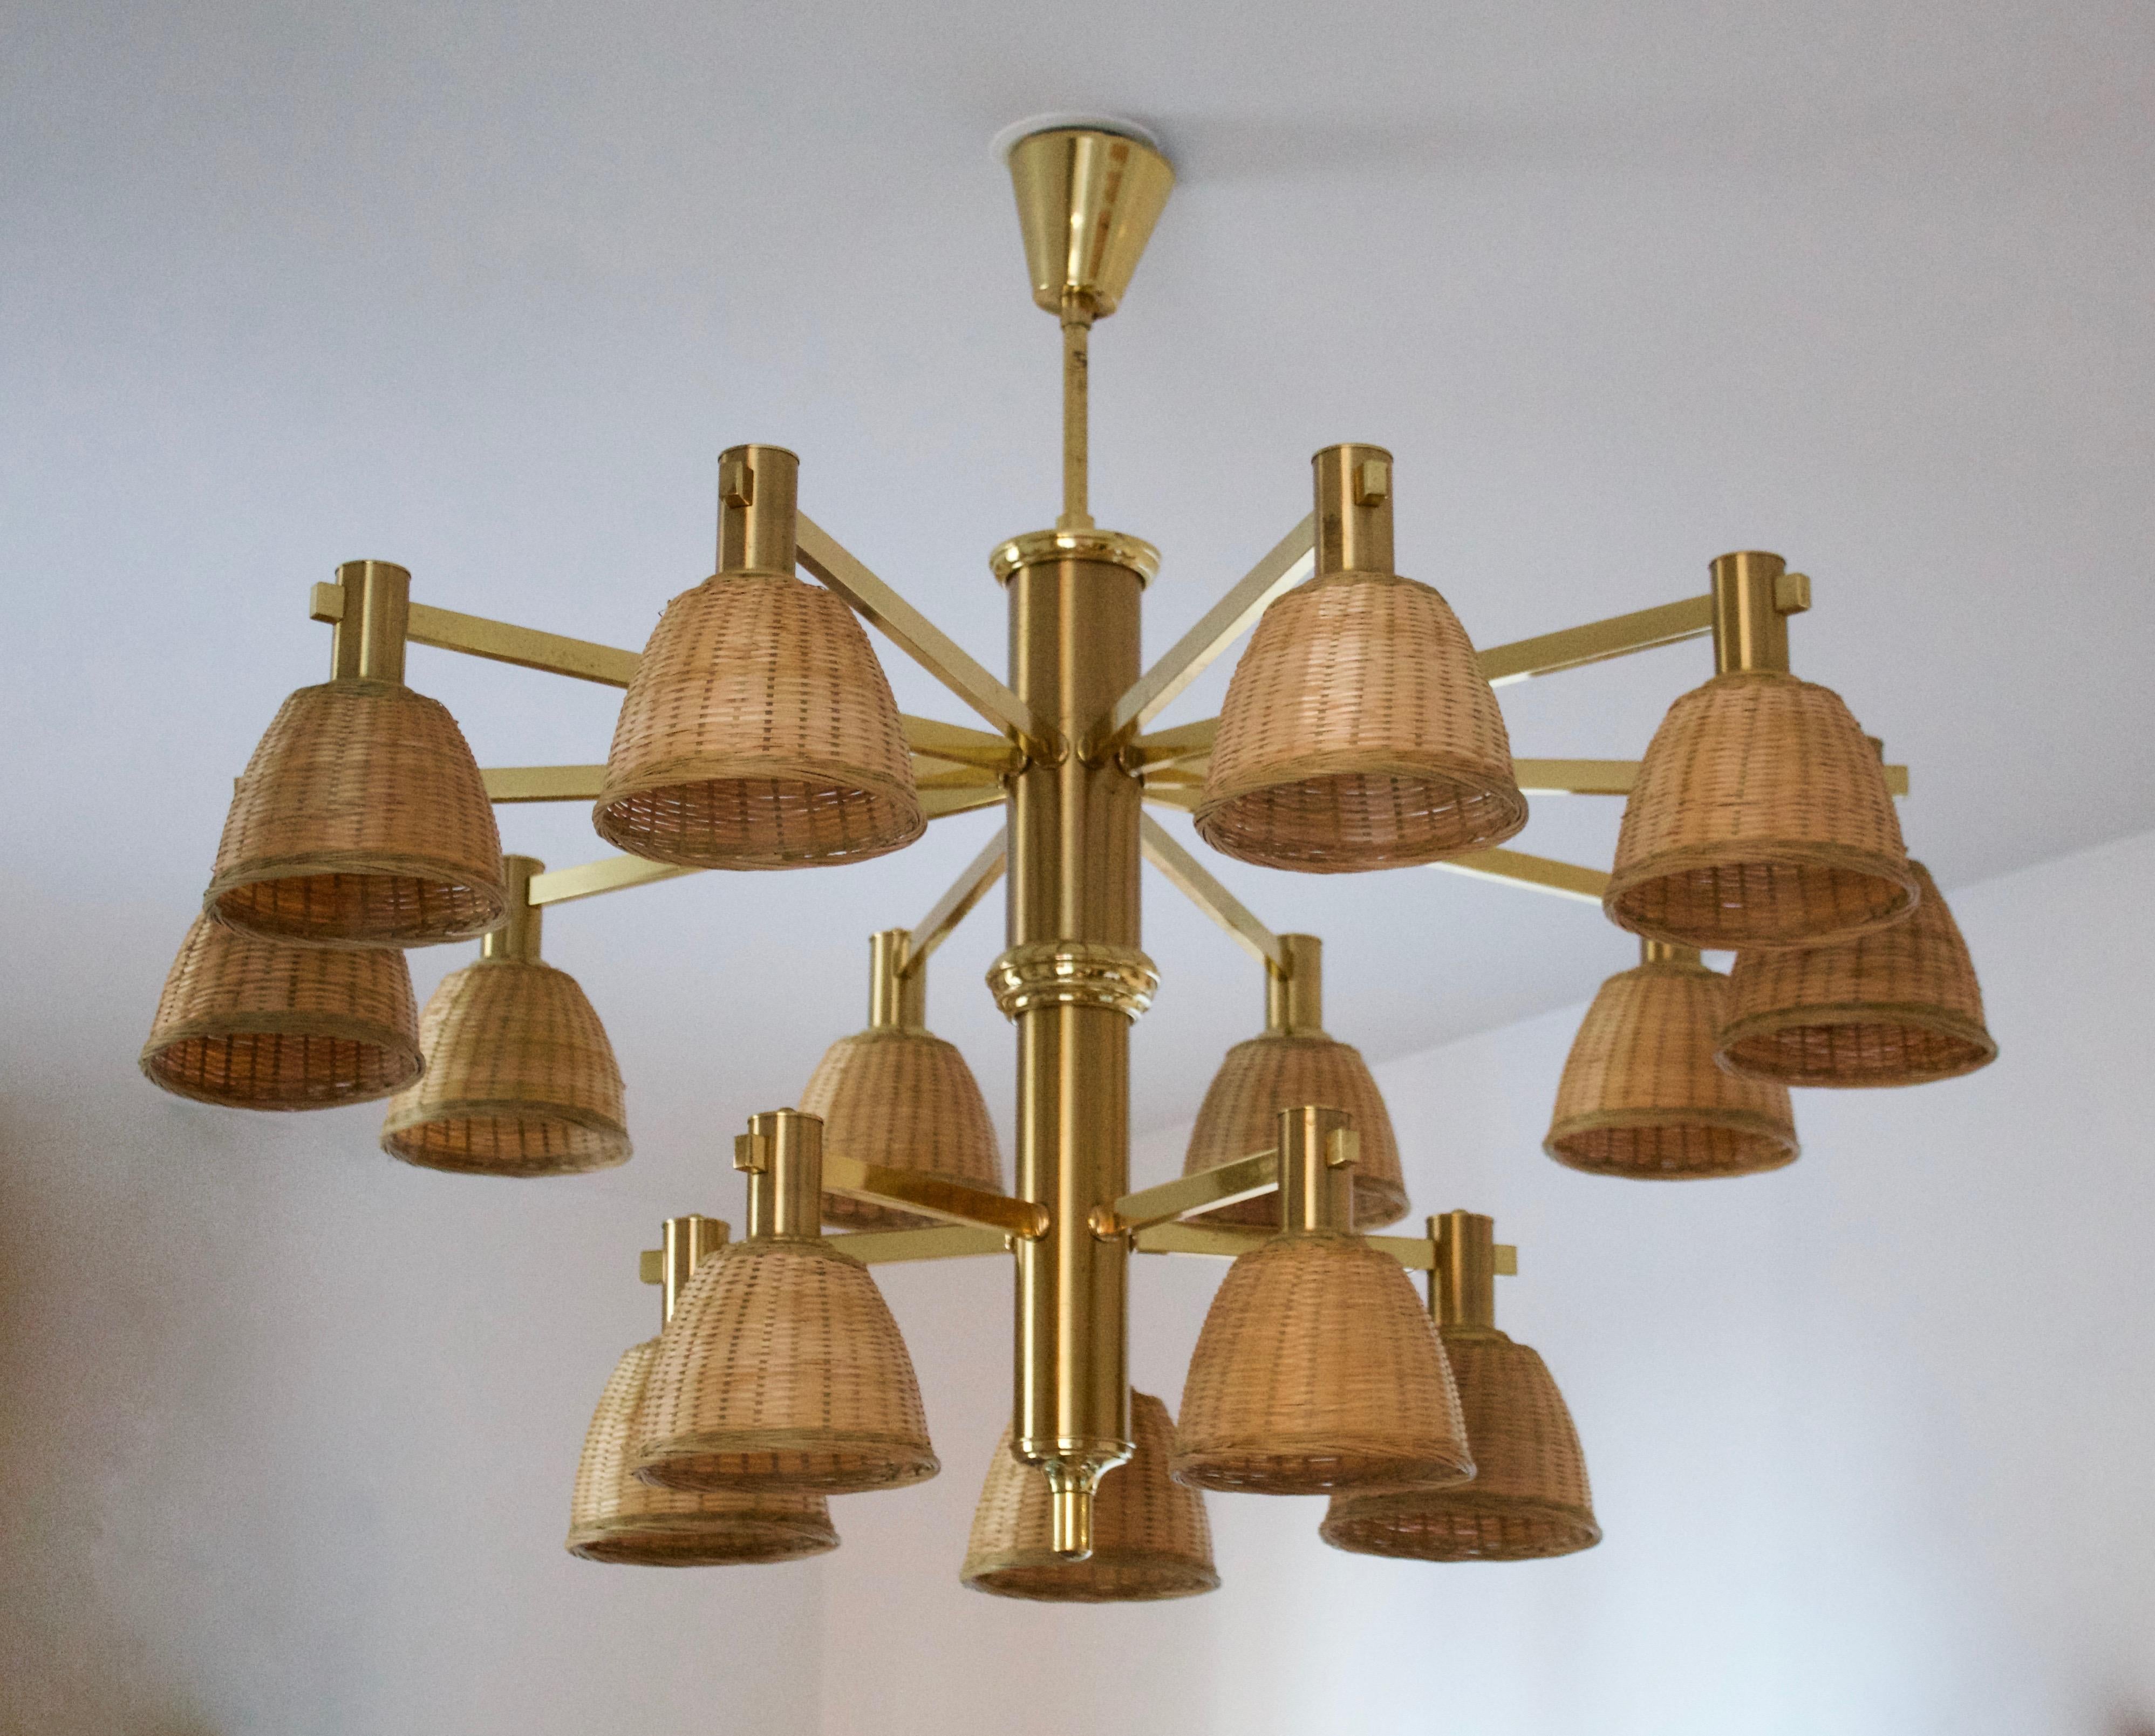 A sizable 15-Armed Chandelier. Designed and production attributed to Eric Wärnå, for EWÅ Värnamo, Sweden, c. 1960s. Assorted vintage rattan lampshades. Originally produced with glass lampshades.

Other designers of the period include Hans-Agne